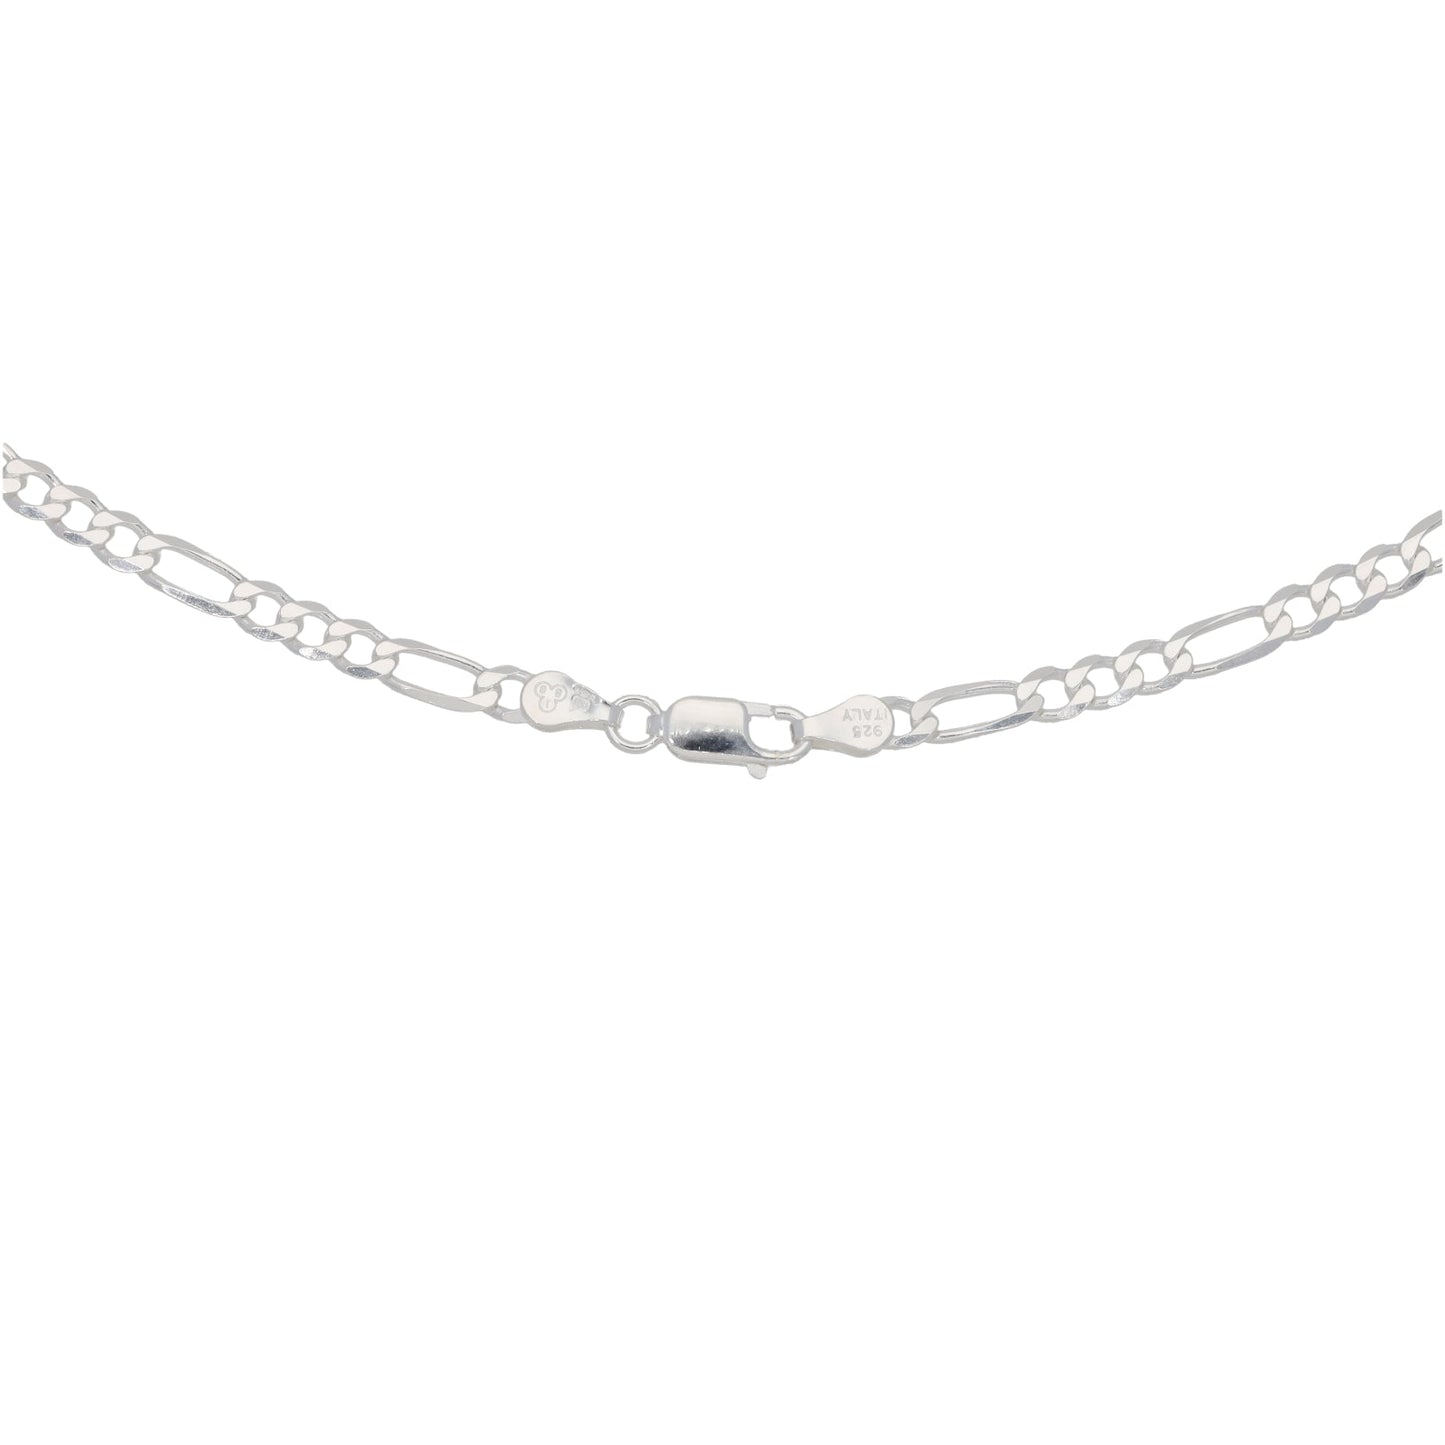 Silver Sterling Figaro Chain 22"